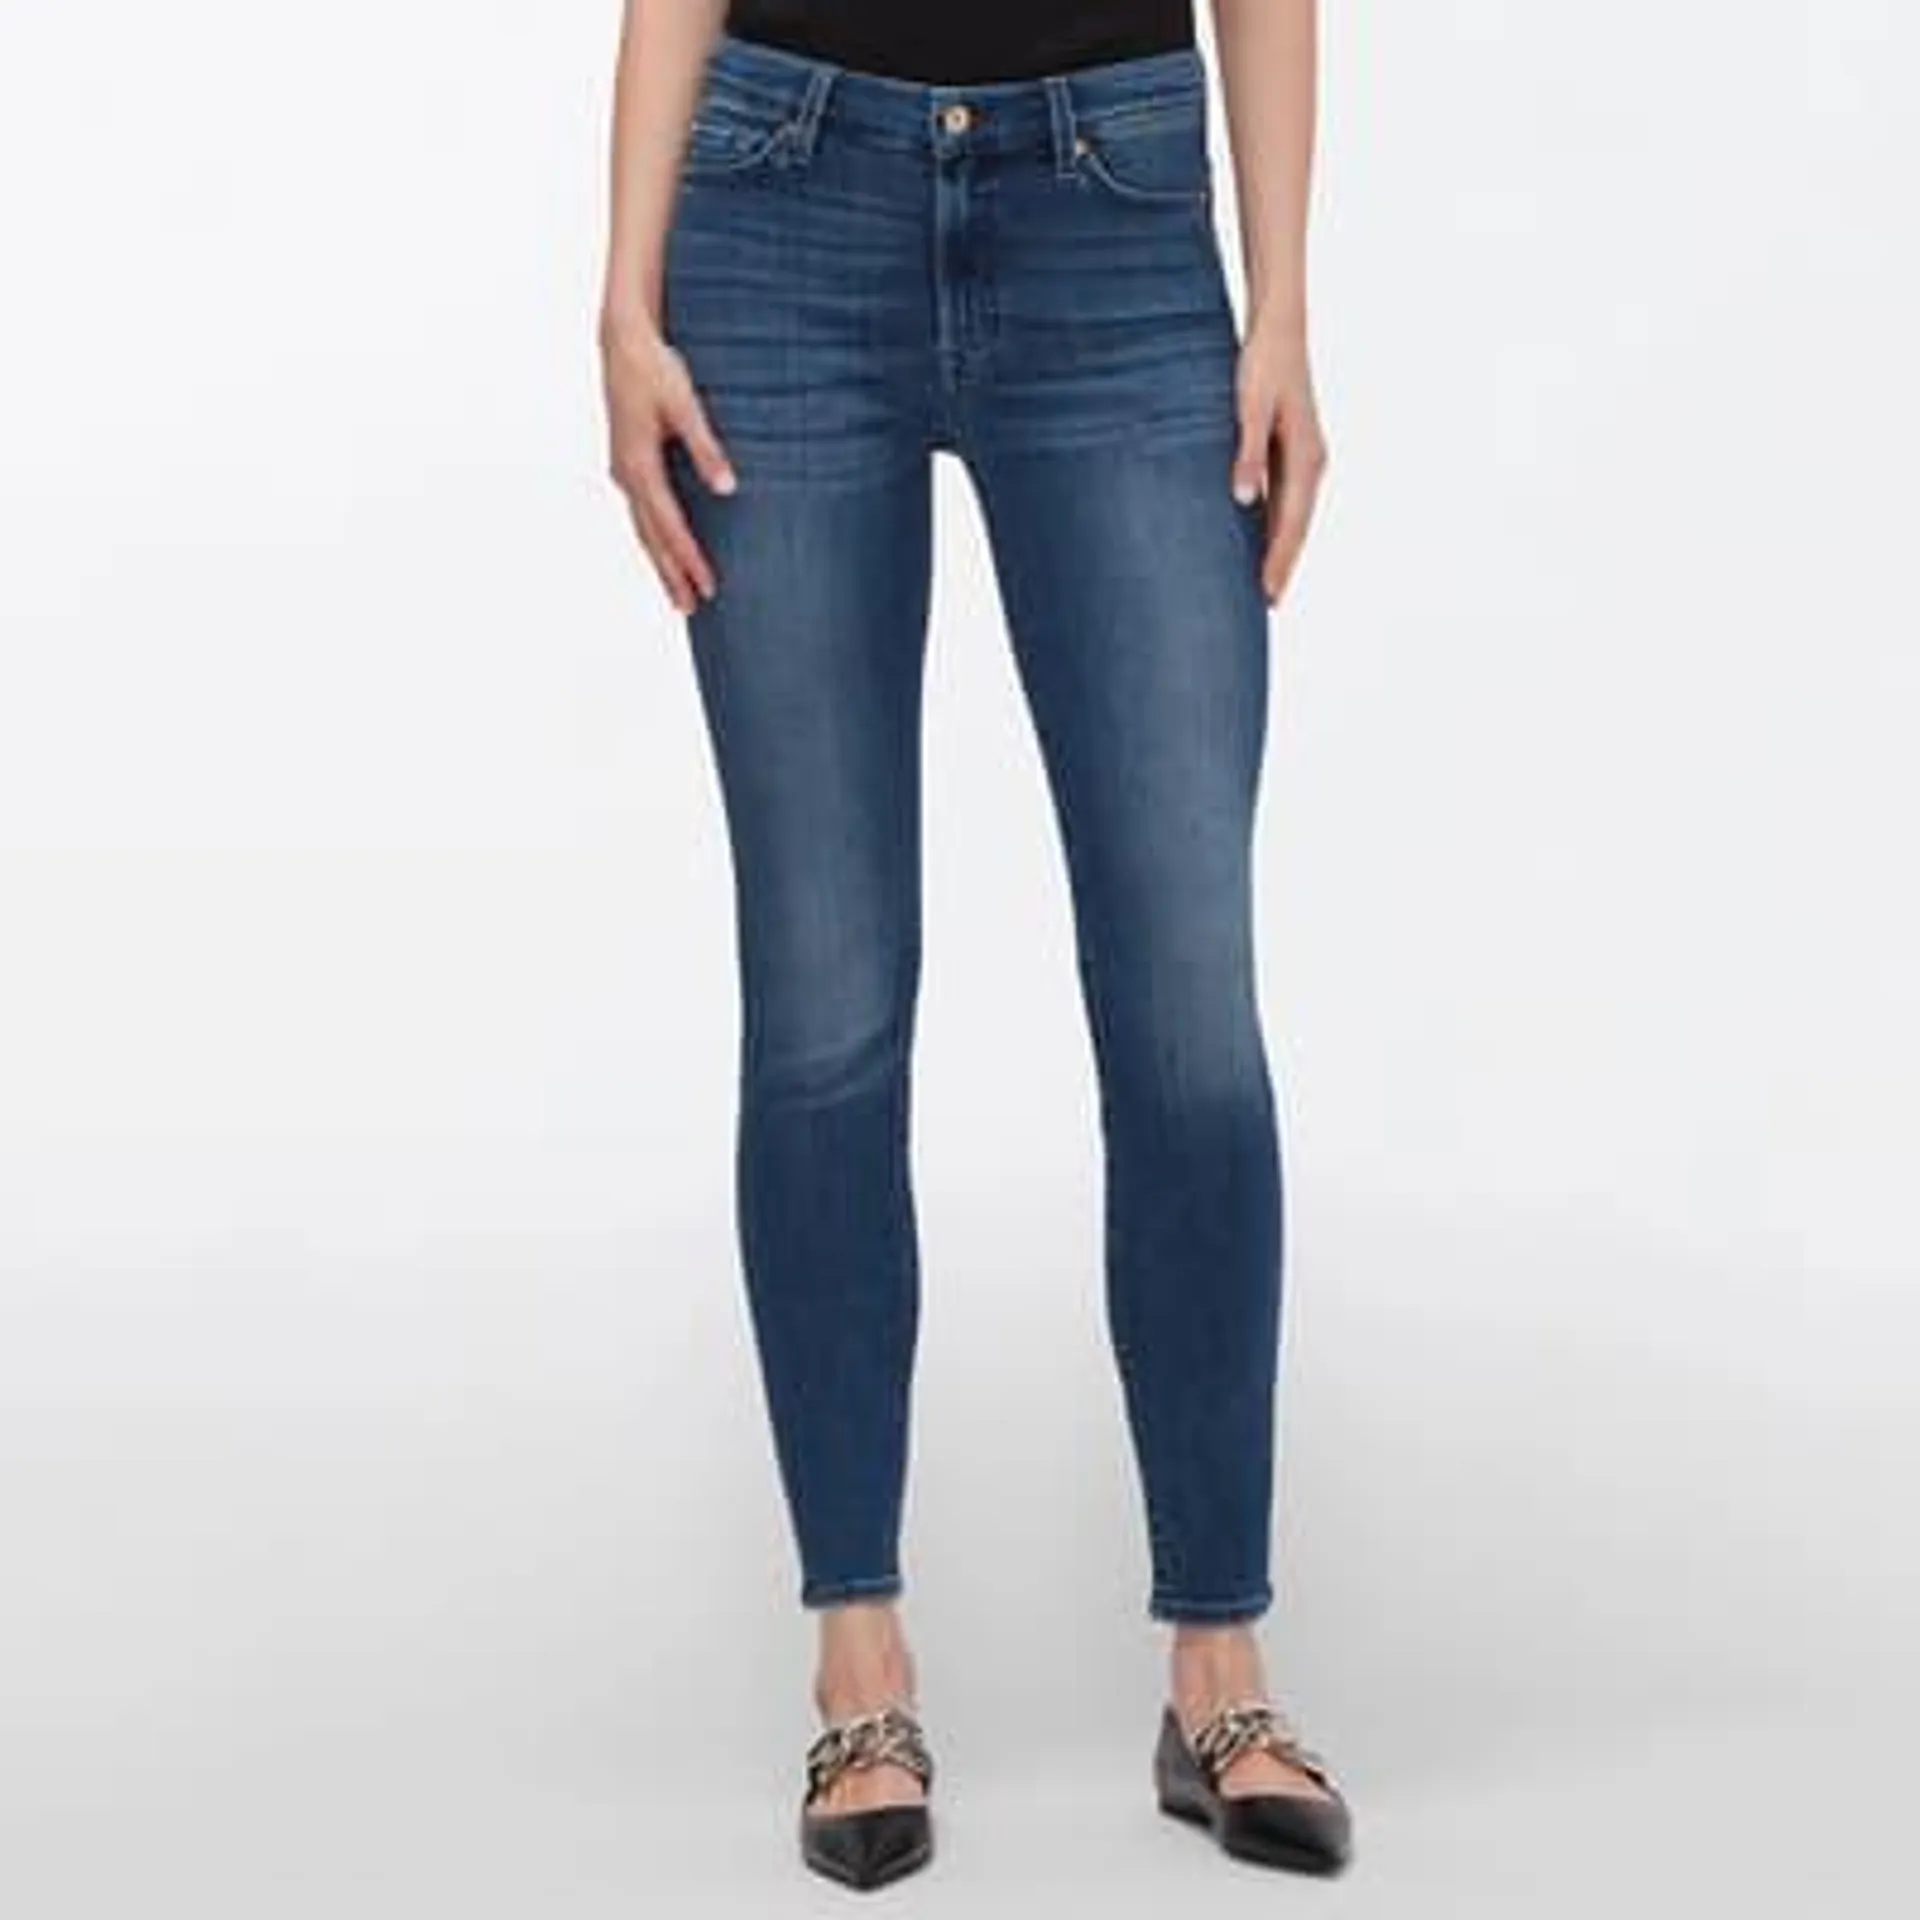 7 For All Mankind Express Women's Jeans